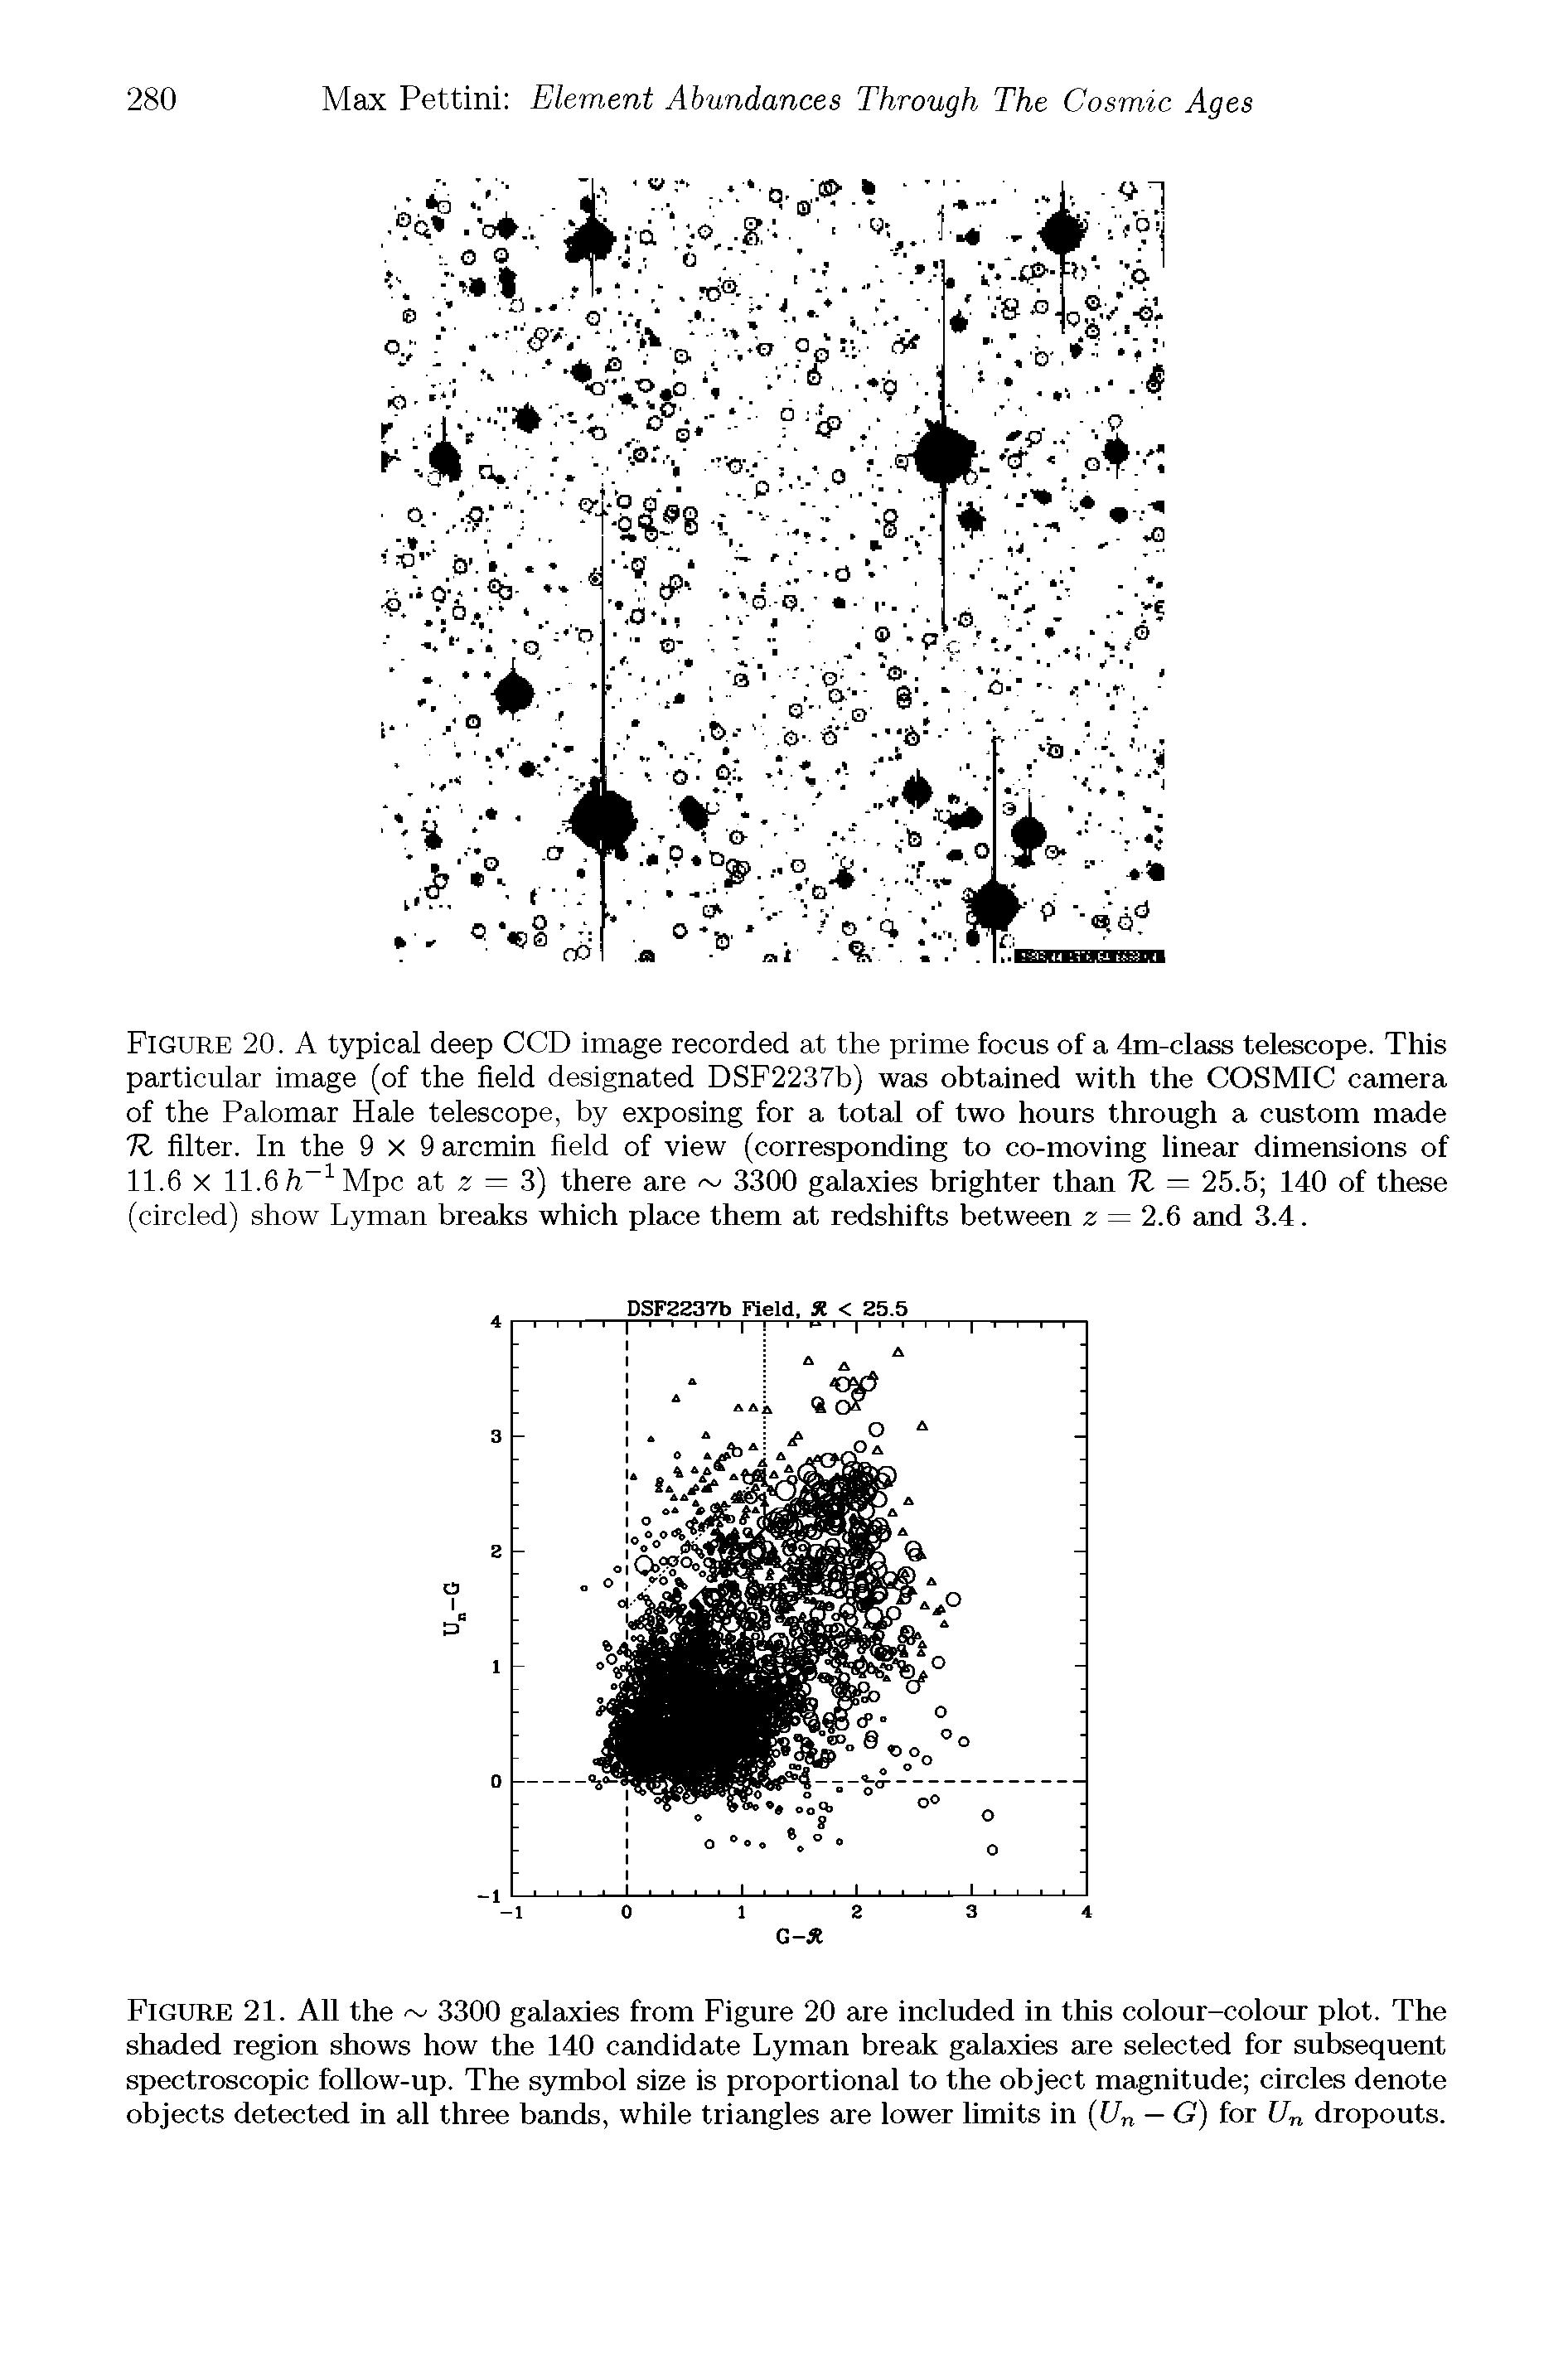 Figure 21. All the 3300 galaxies from Figure 20 are included in this colour-colour plot. The shaded region shows how the 140 candidate Lyman break galaxies are selected for subsequent spectroscopic follow-up. The symbol size is proportional to the object magnitude circles denote objects detected in all three bands, while triangles are lower limits in (Un — G) for U dropouts.